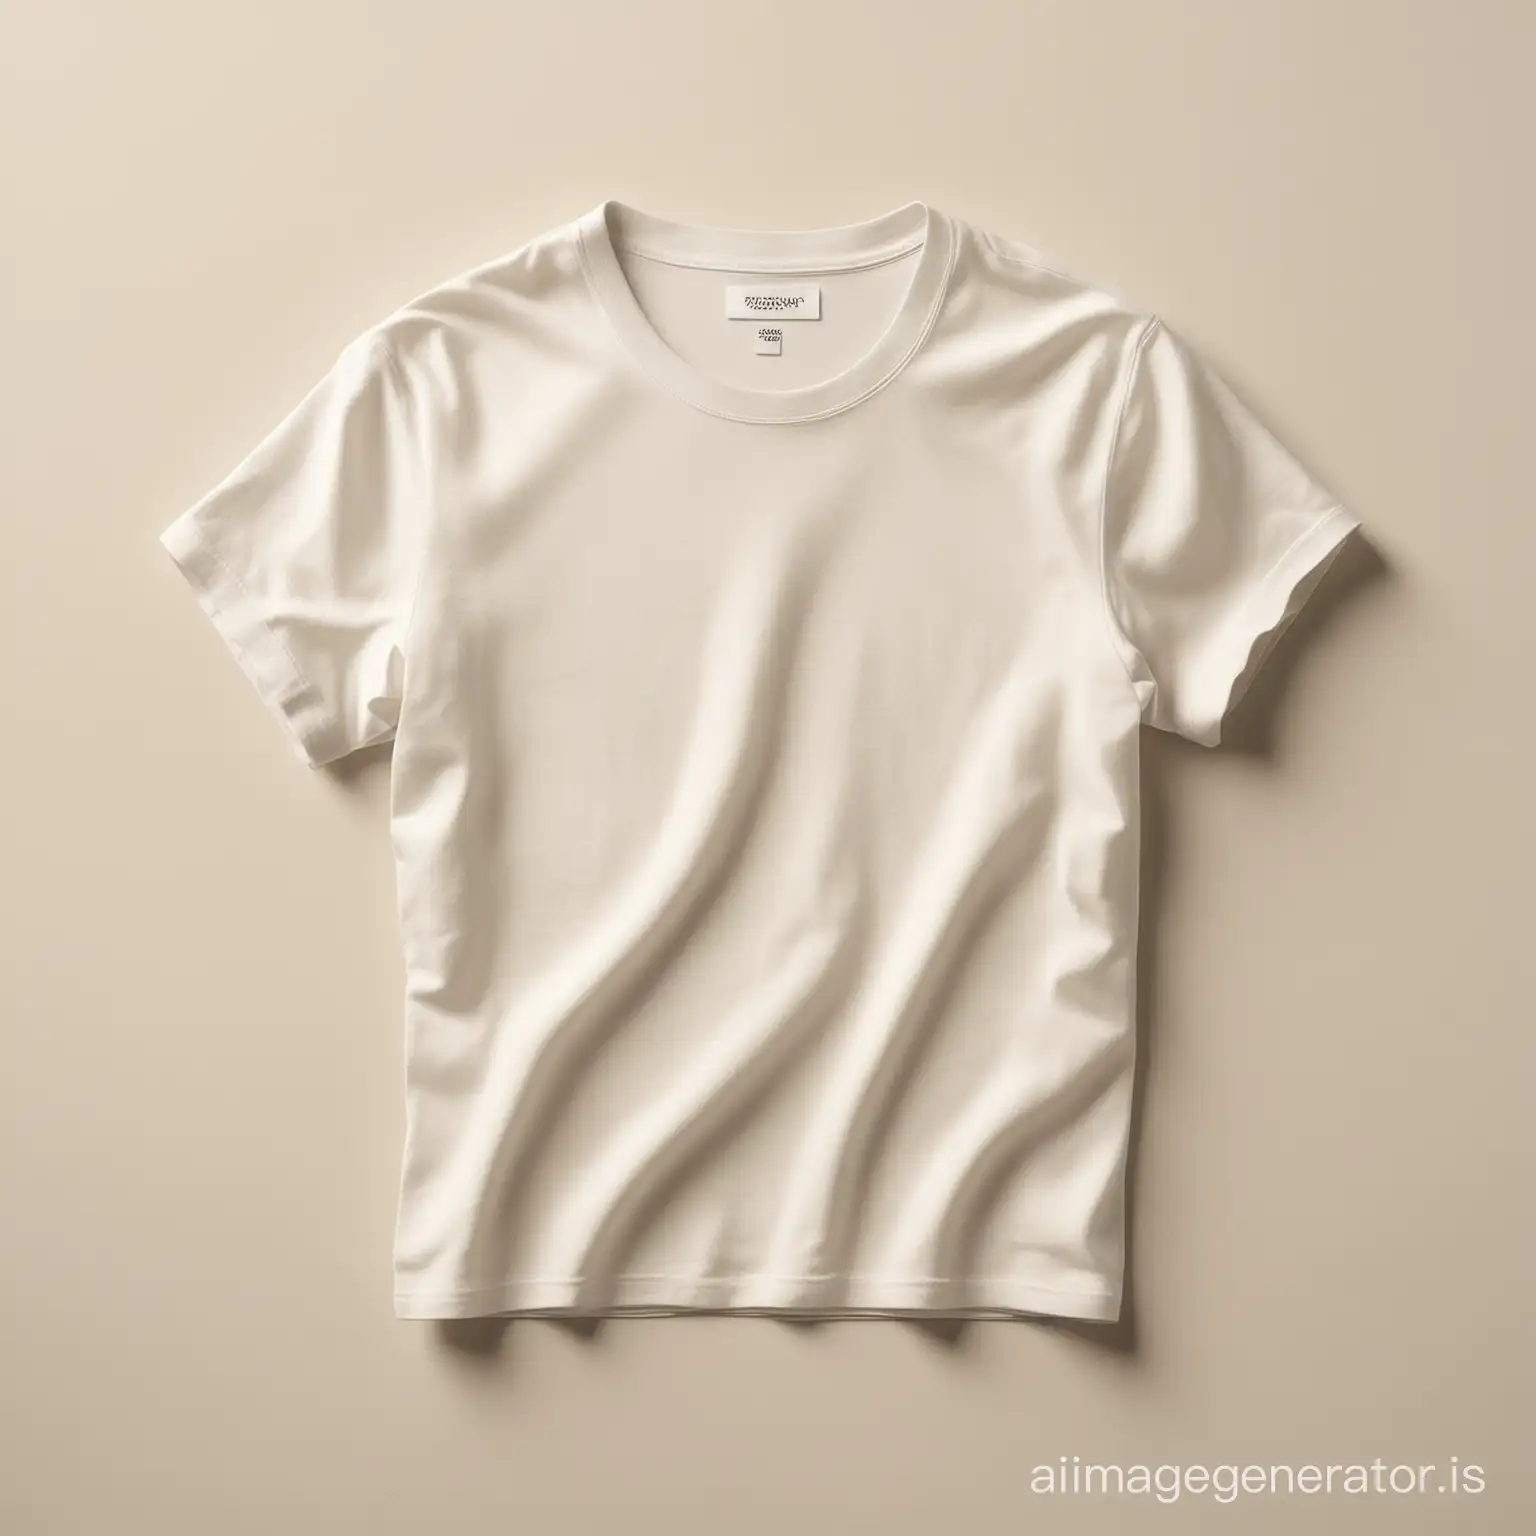 Luxurious-Ivory-Cotton-TShirt-in-Natural-Daylight-Studio-Setting